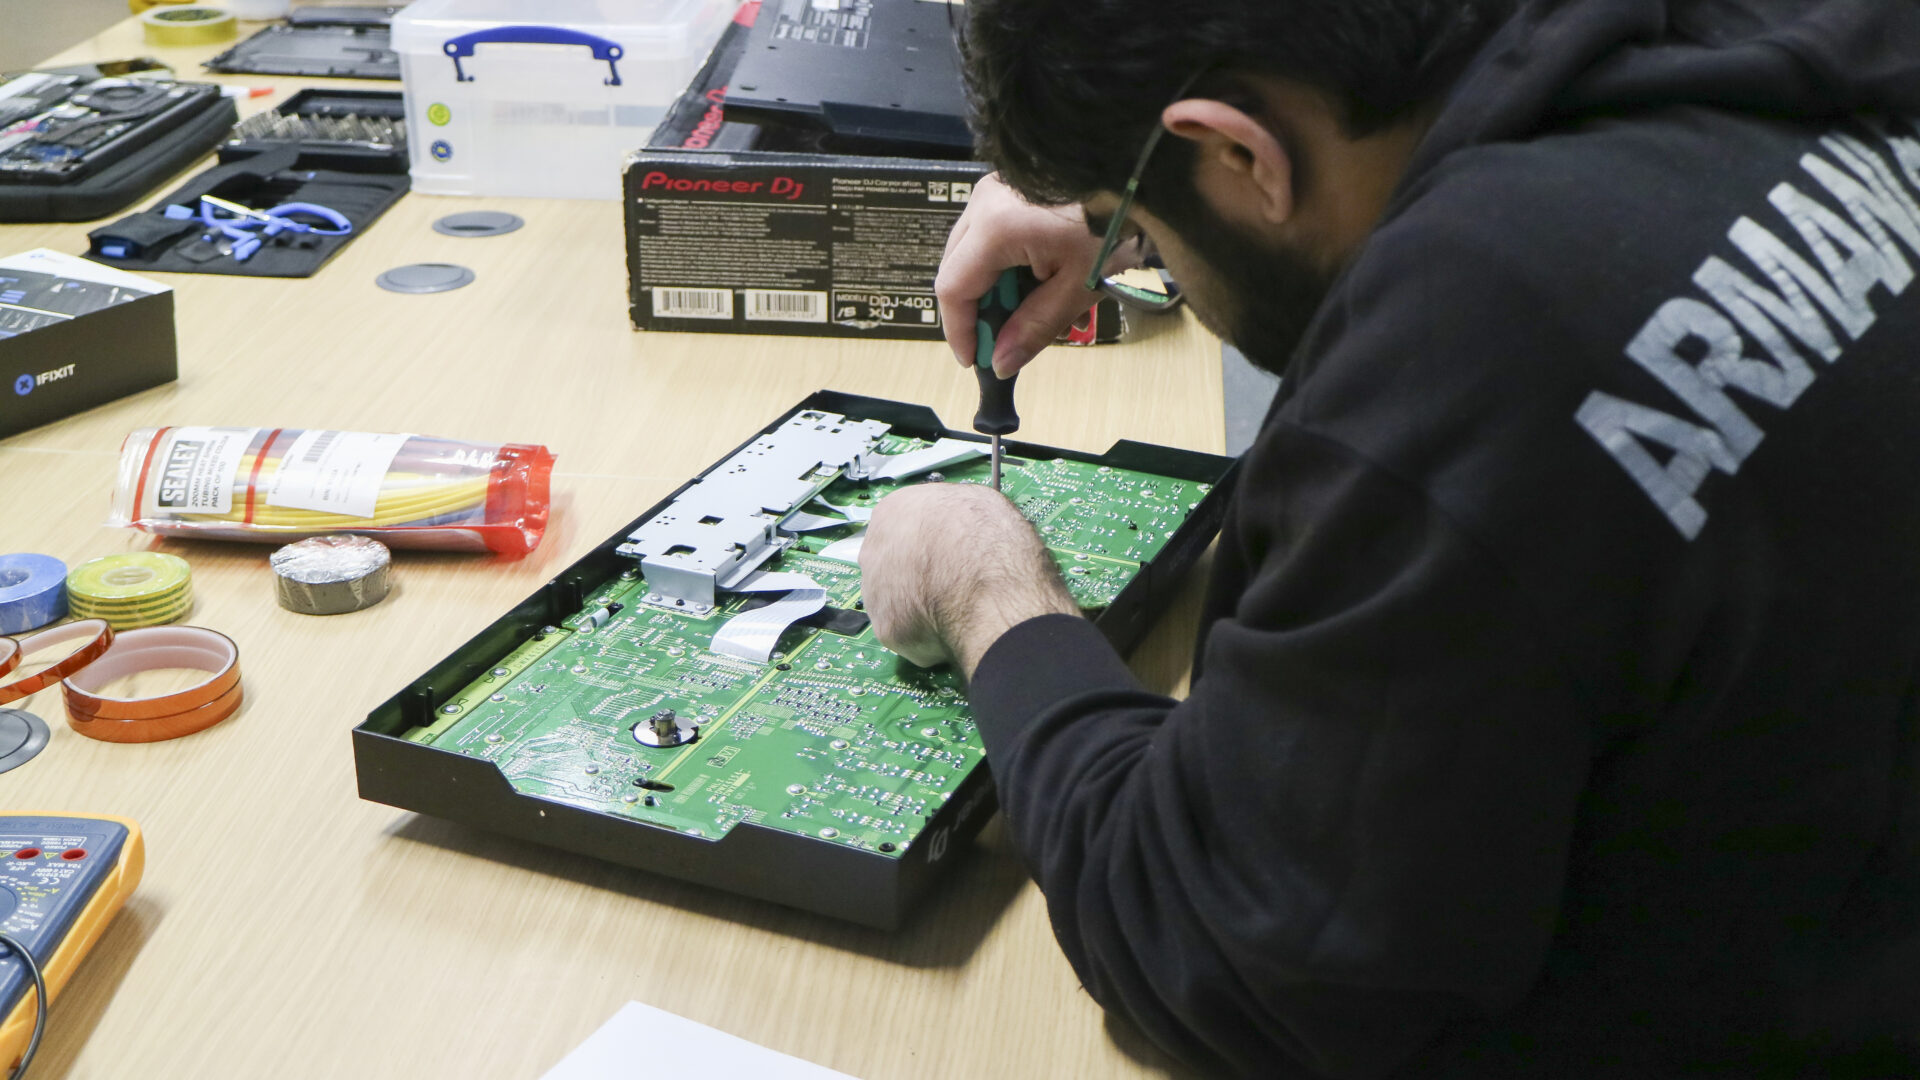 A student using tools to fix an electronic item